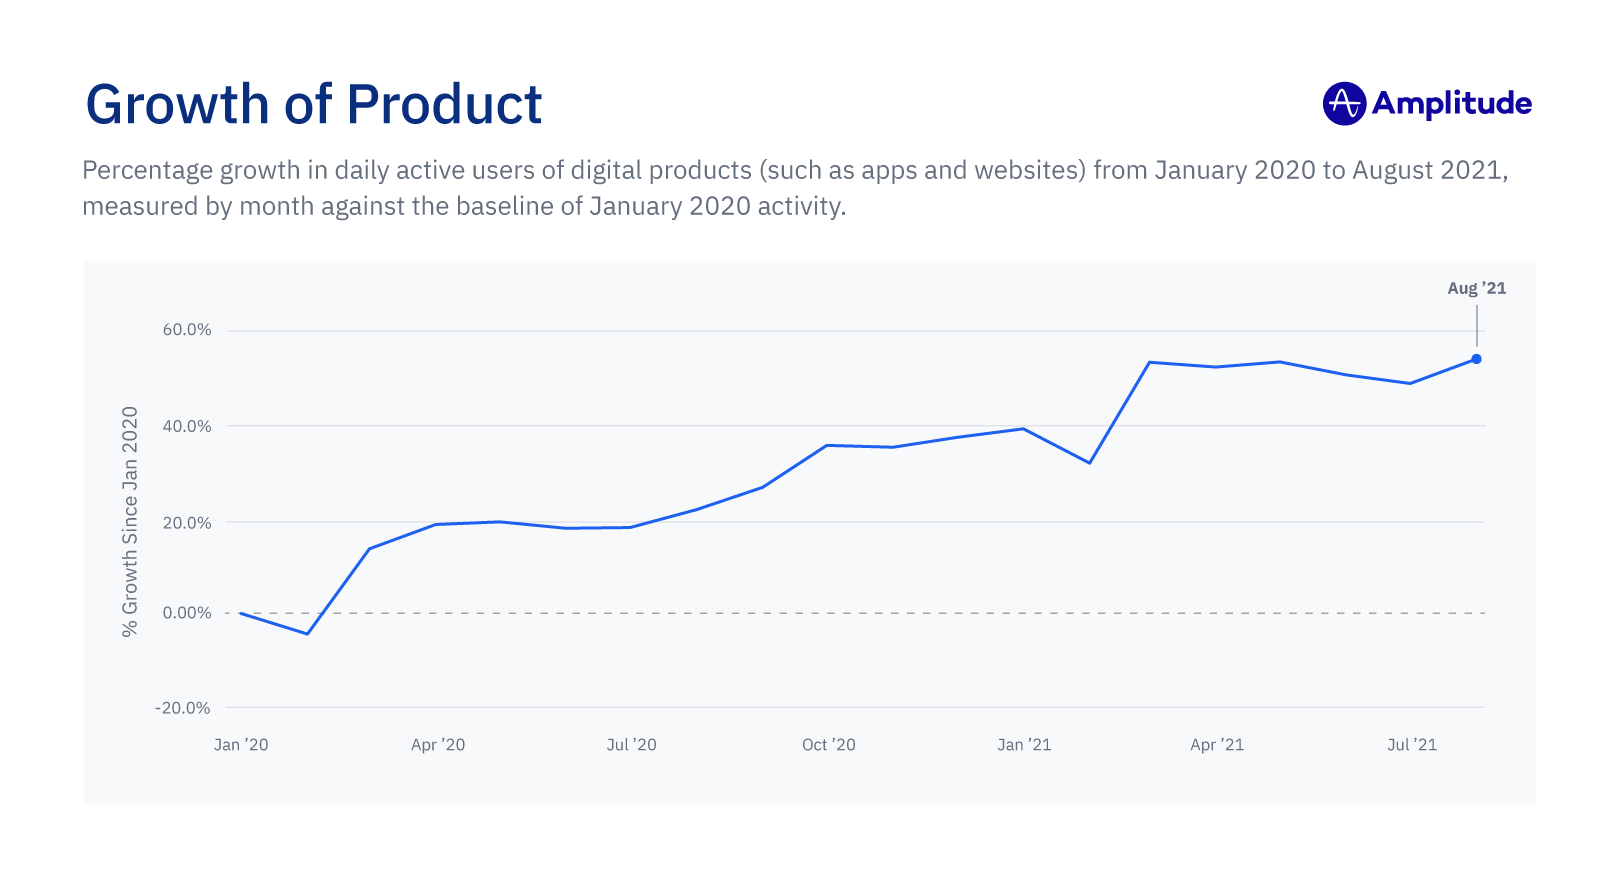 Amplitude Product Report 2021, Growth of Product graph